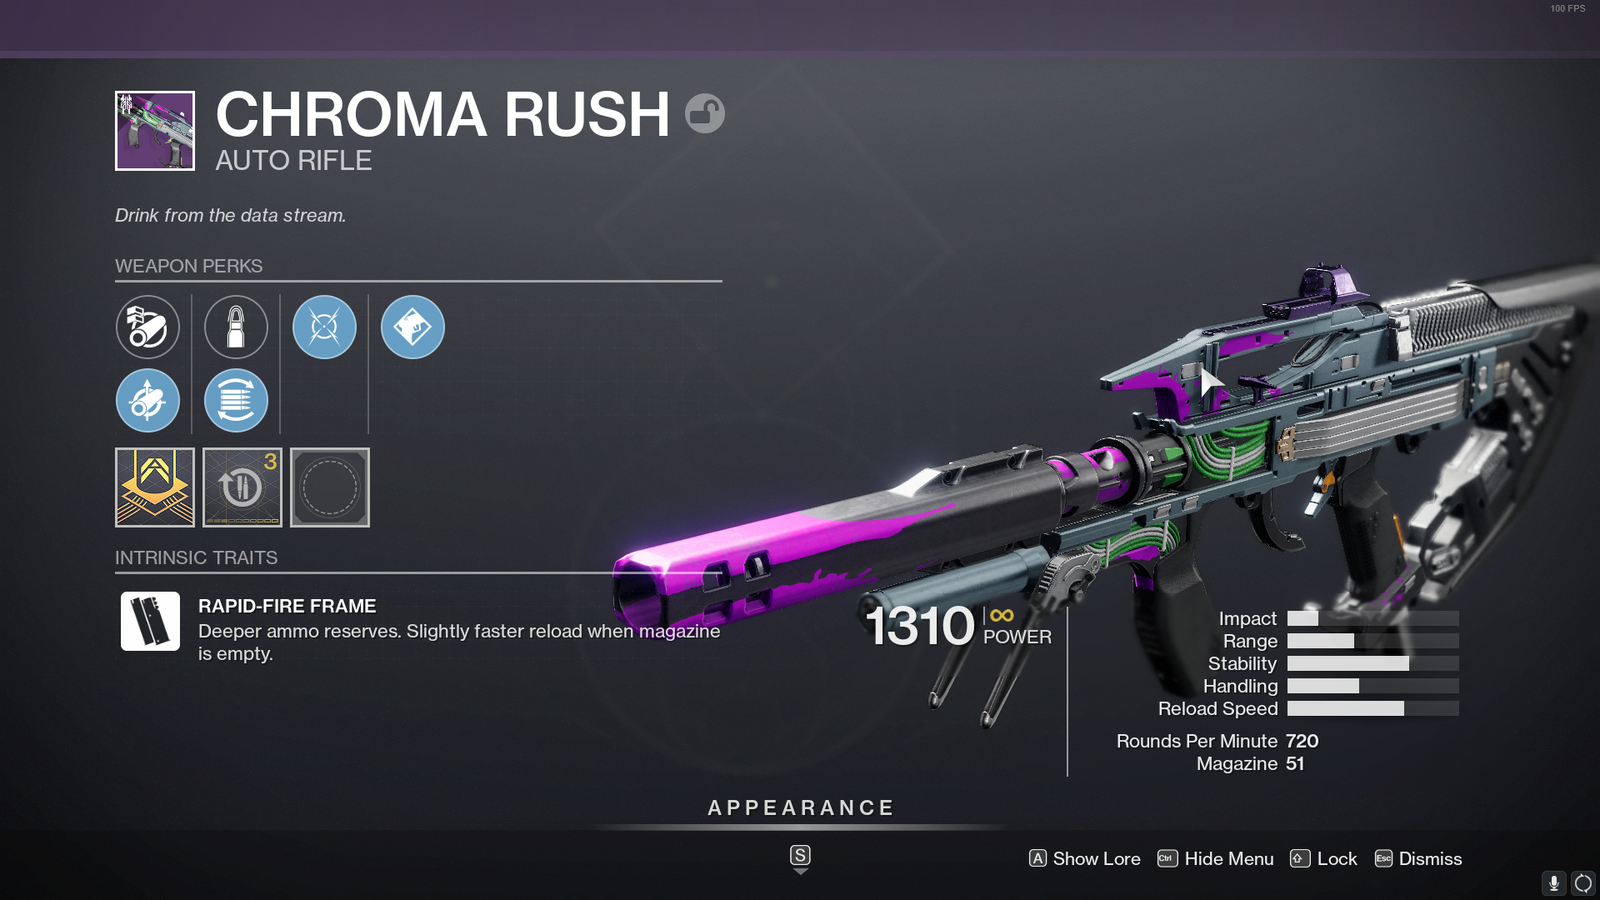 Image of the Destiny 2 weapon, Chroma Rush, with its perks on display.